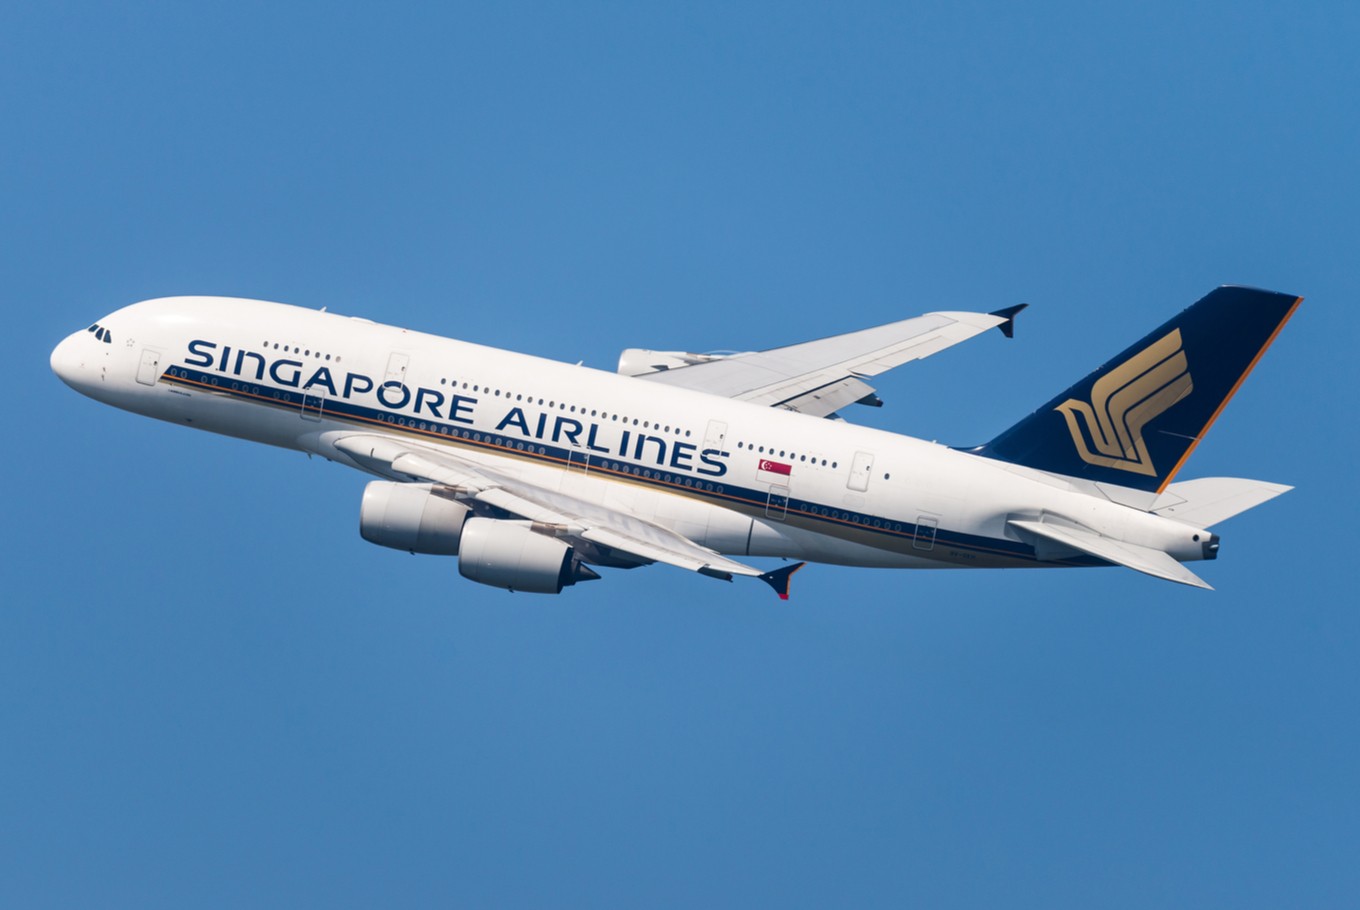 Singapore Airlines customers in India enjoy more options with kris+ lifestyle app